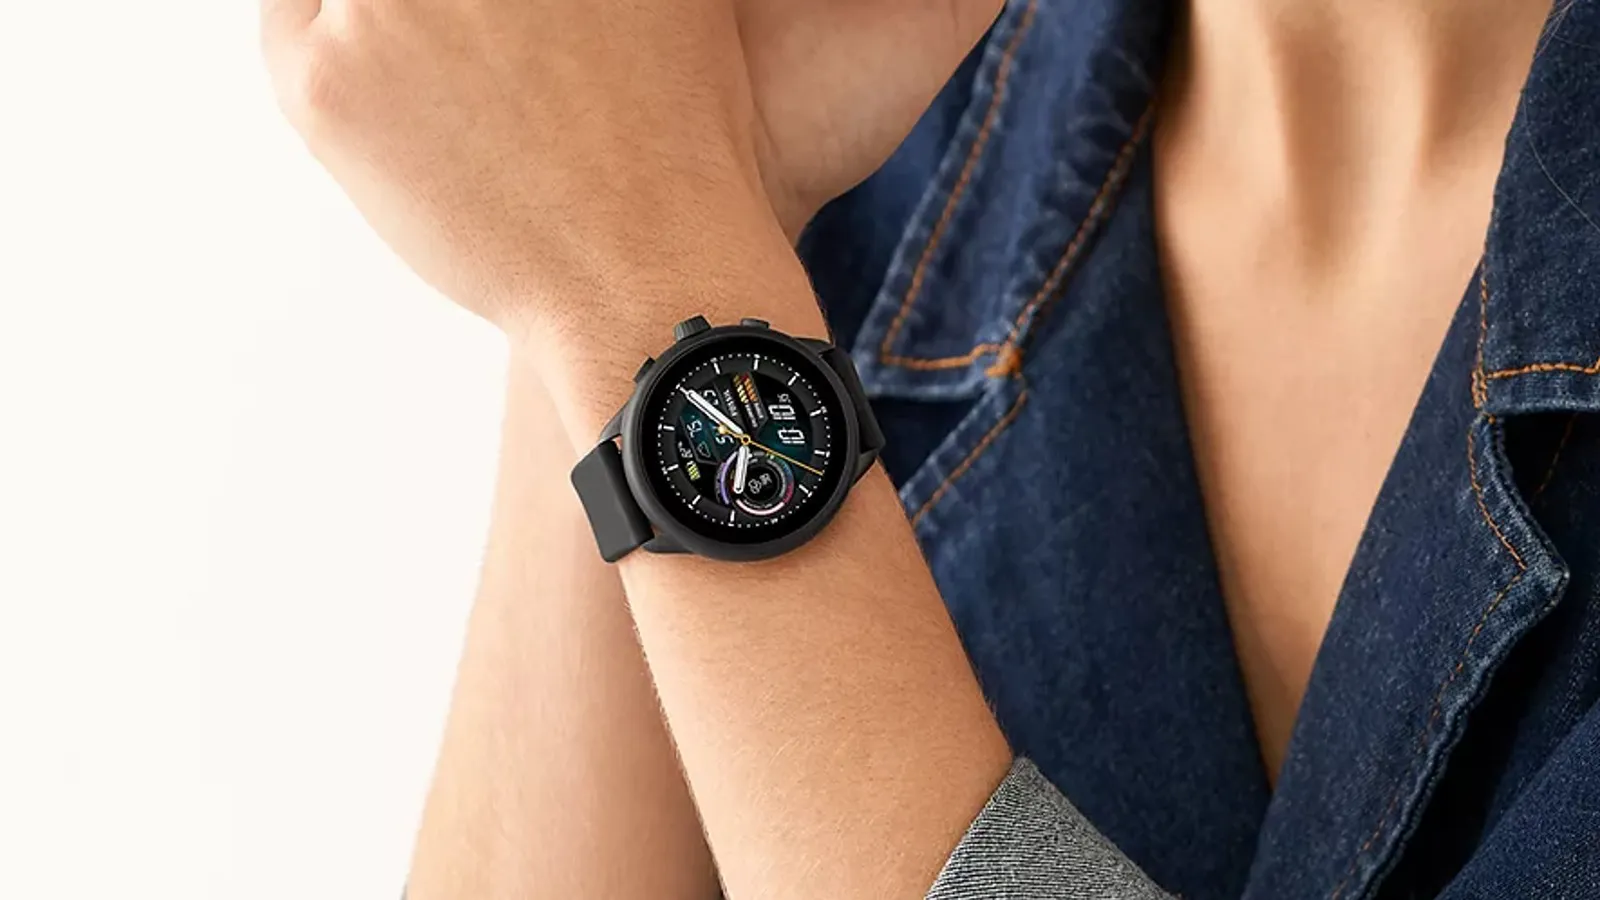 The End of an Era for Fossil Smartwatches